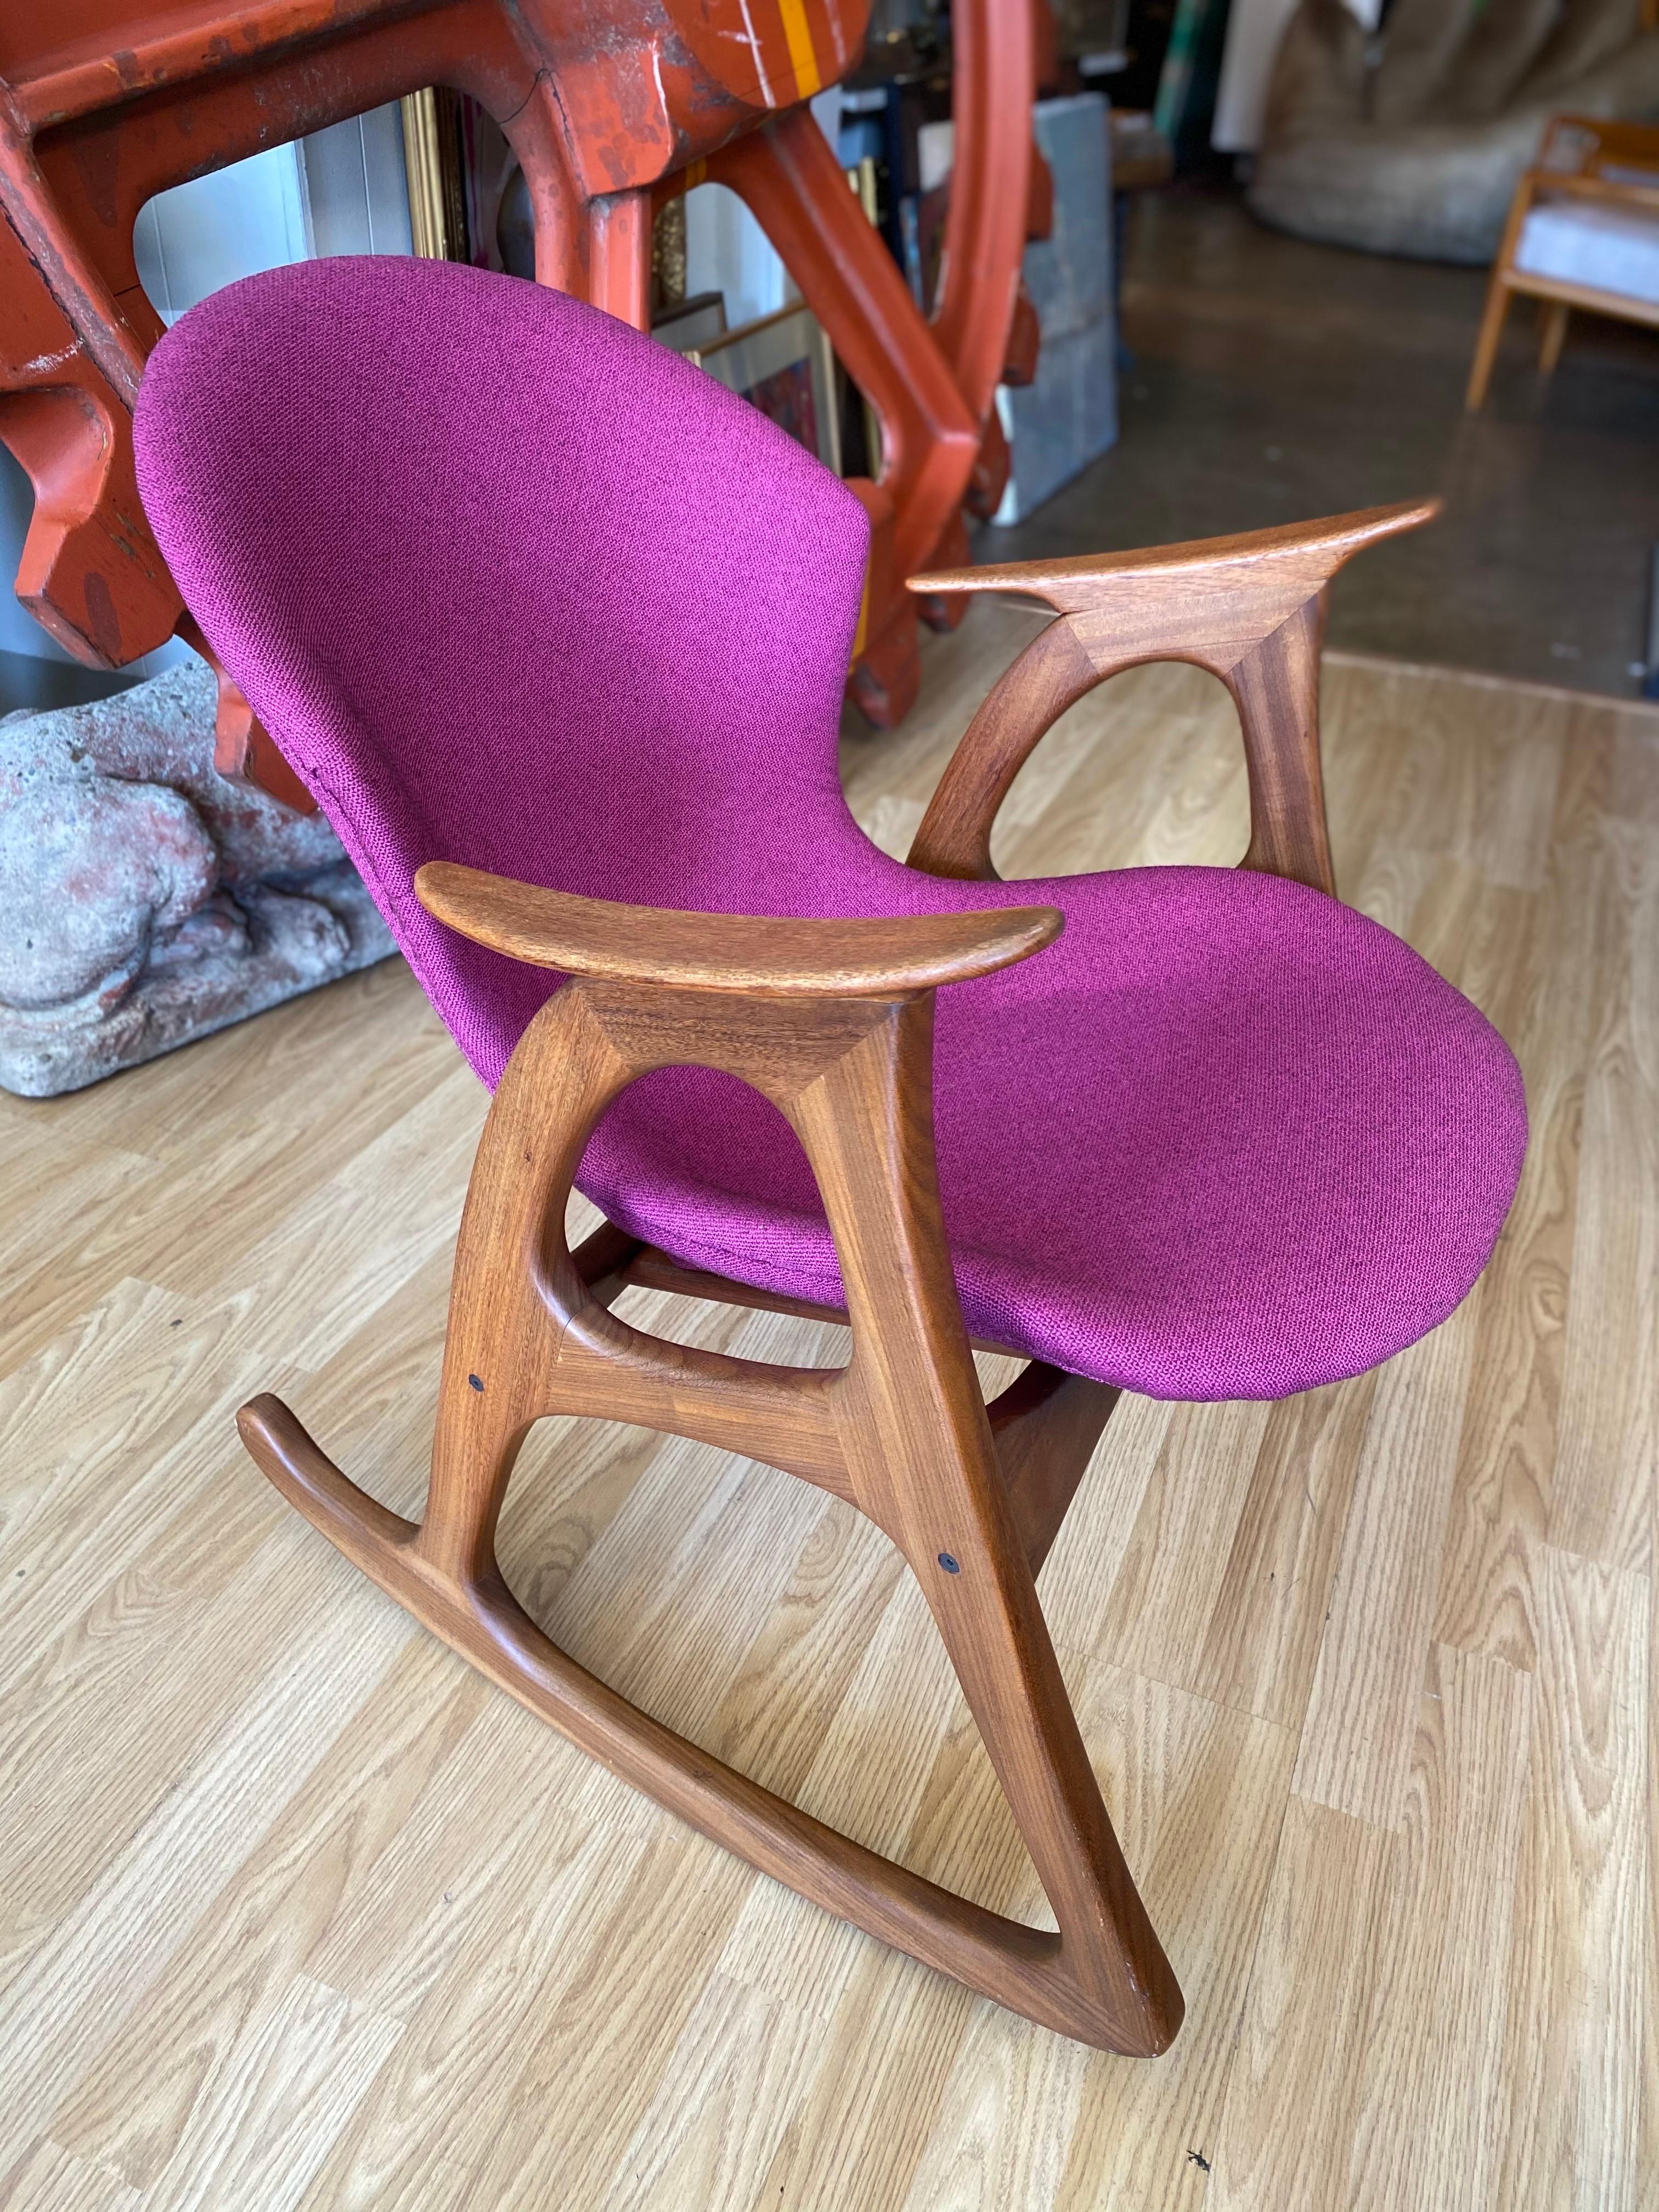 Beautiful Danish modern teak rocking chair by Aage Christiansen has been professionally reupholstered with Knoll fabric and is in great vintage condition. Denmark, 1960s.